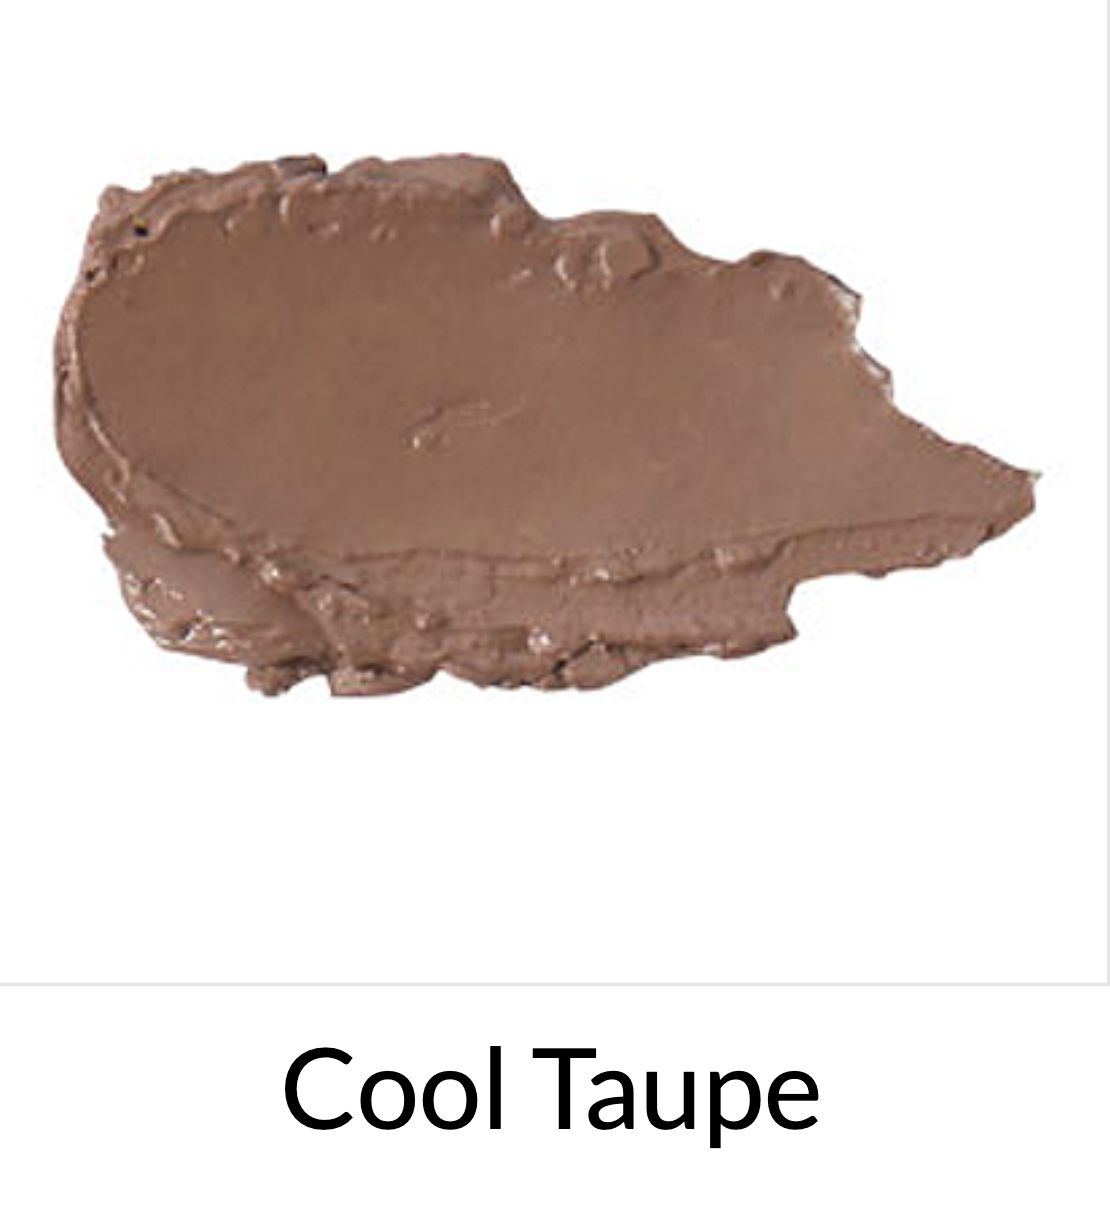 Brow Pow Cool Taupe Eyebrow Gel color swatch